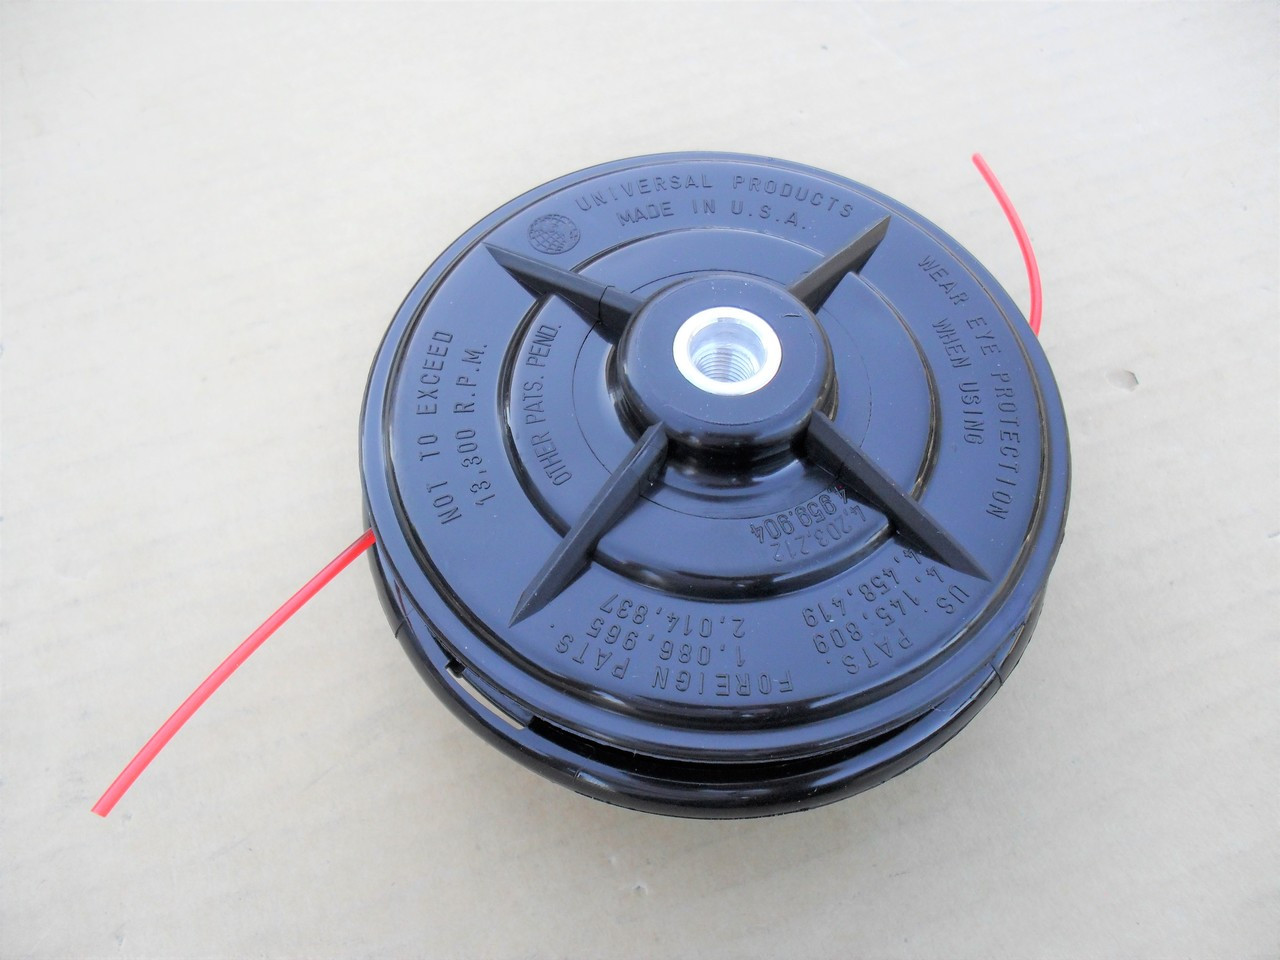 String Trimmer Bump Head for Black and Decker 82255, 82257, 82267, 827104, 82894, 8271-04, 8289-4, Made In USA